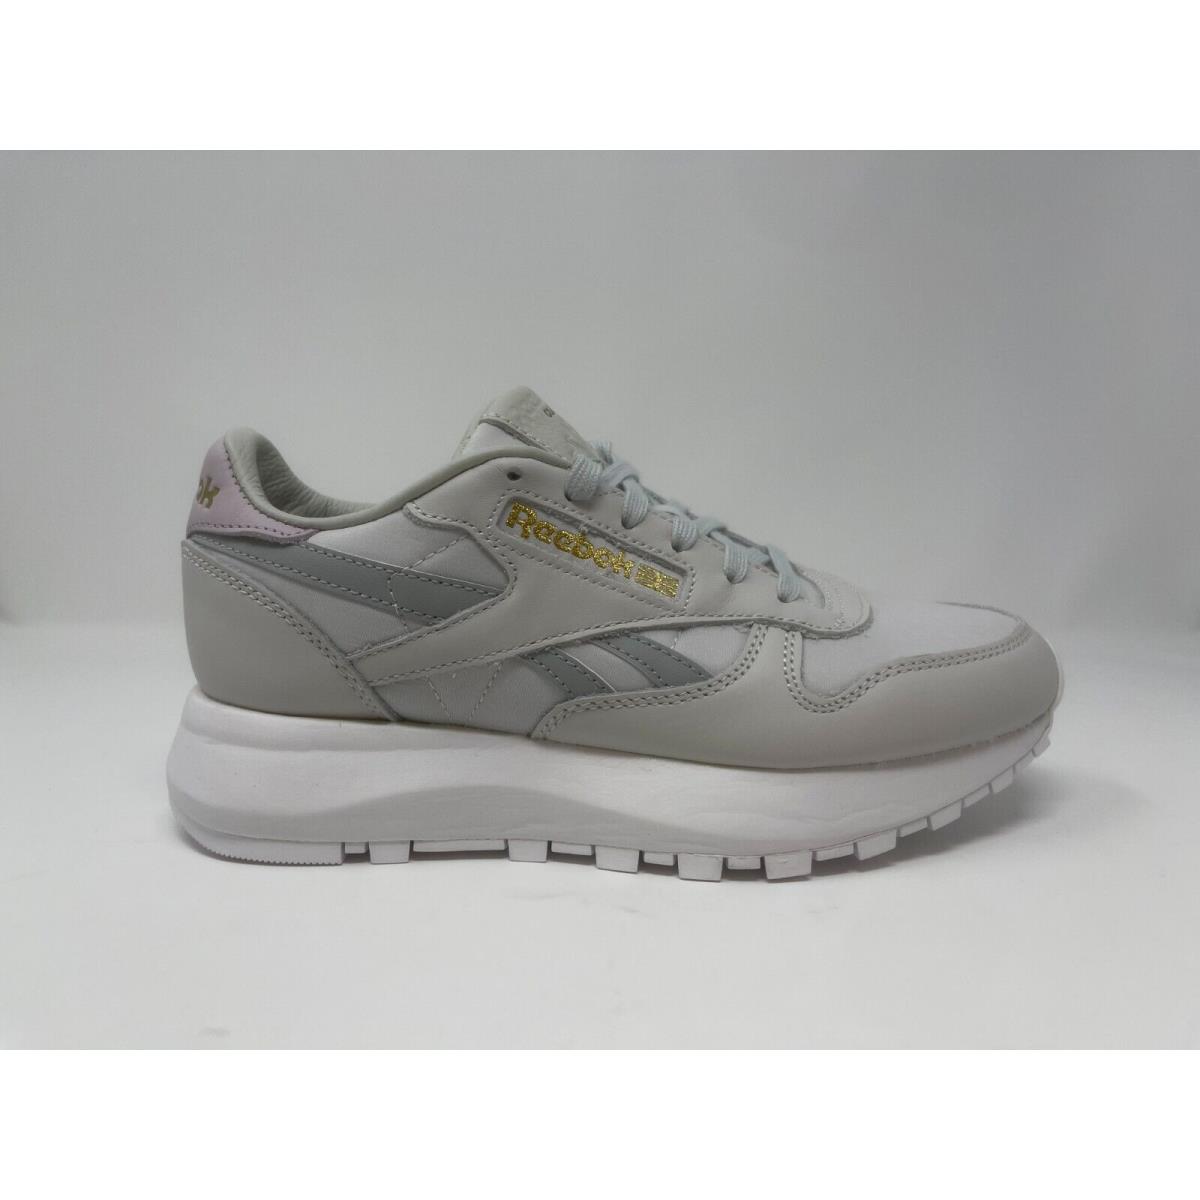 Reebok shoes Classic Leather - Gray 1